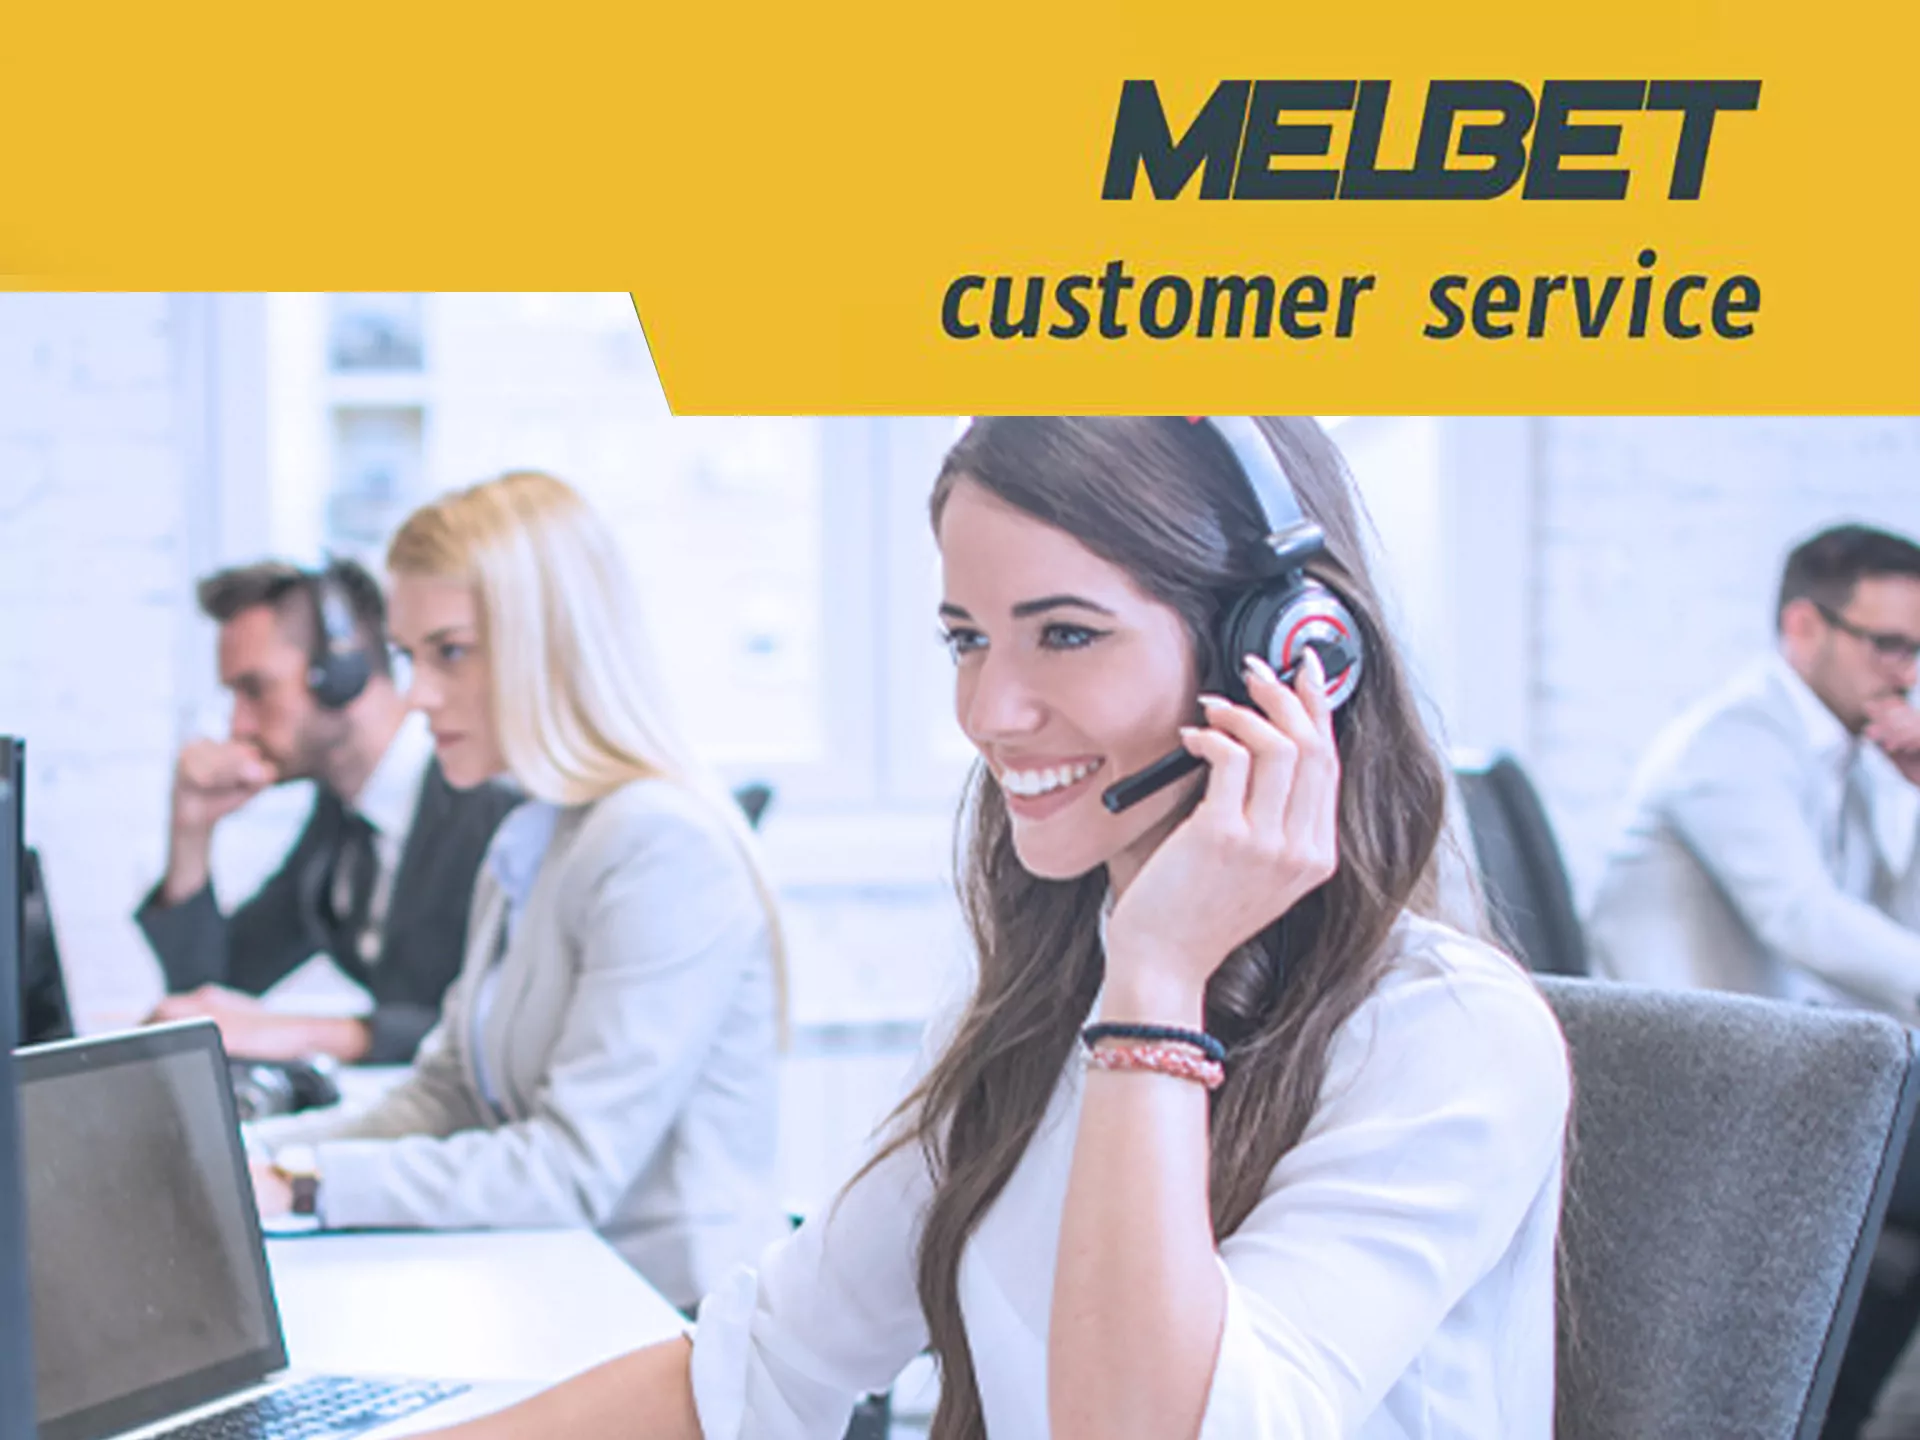 Melbet support, ask all questions.